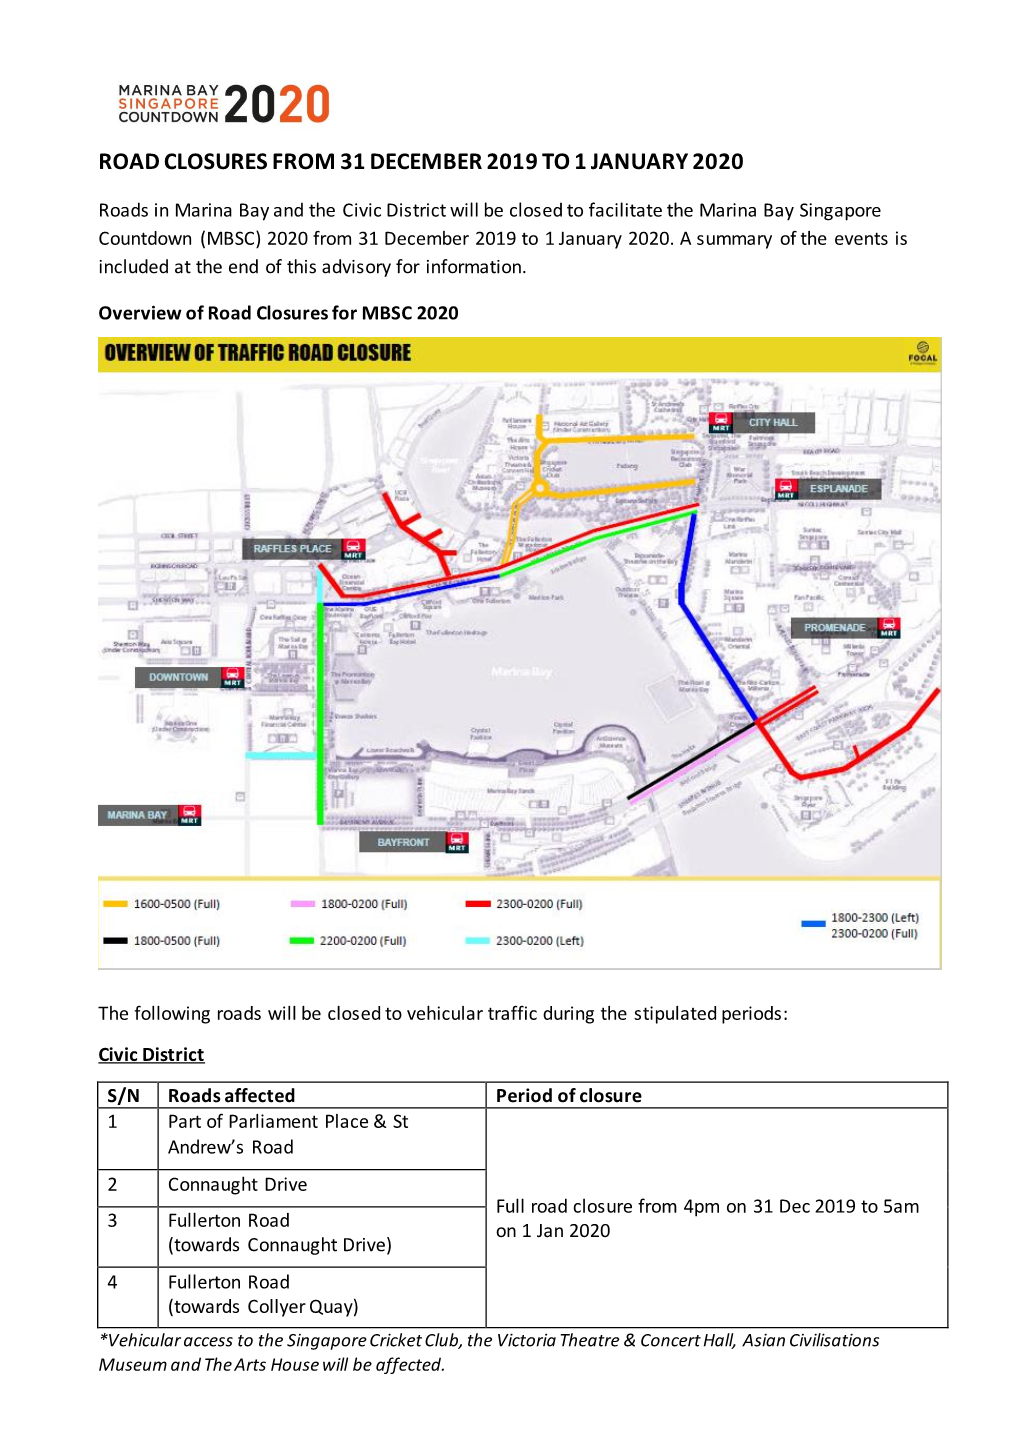 Road Closures from 31 December 2019 to 1 January 2020